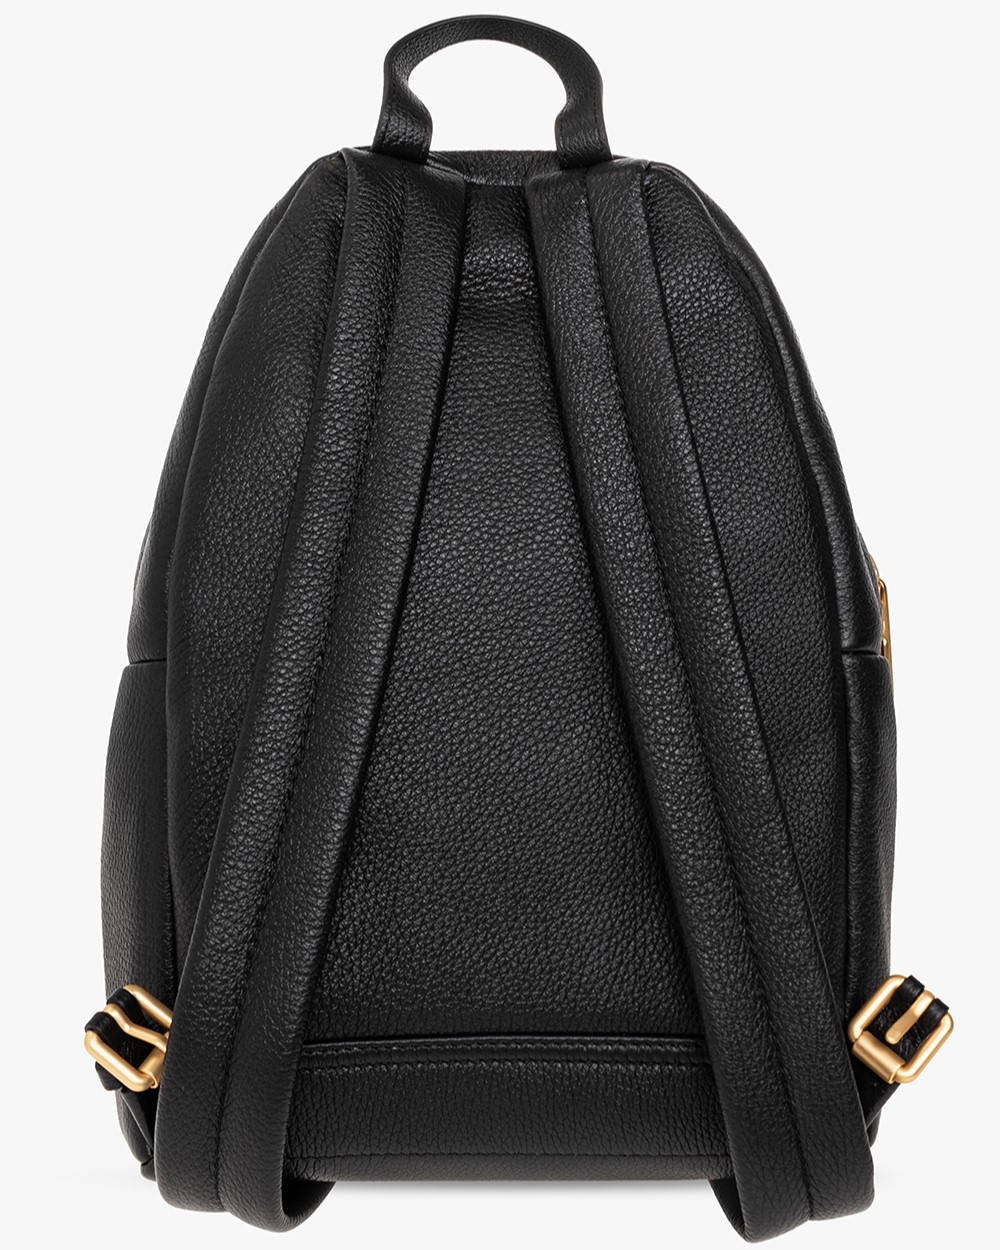 BALO NỮ MÀU ĐEN MOSCHINO BLACK LEATHER BACKPACK WITH LOGO 1